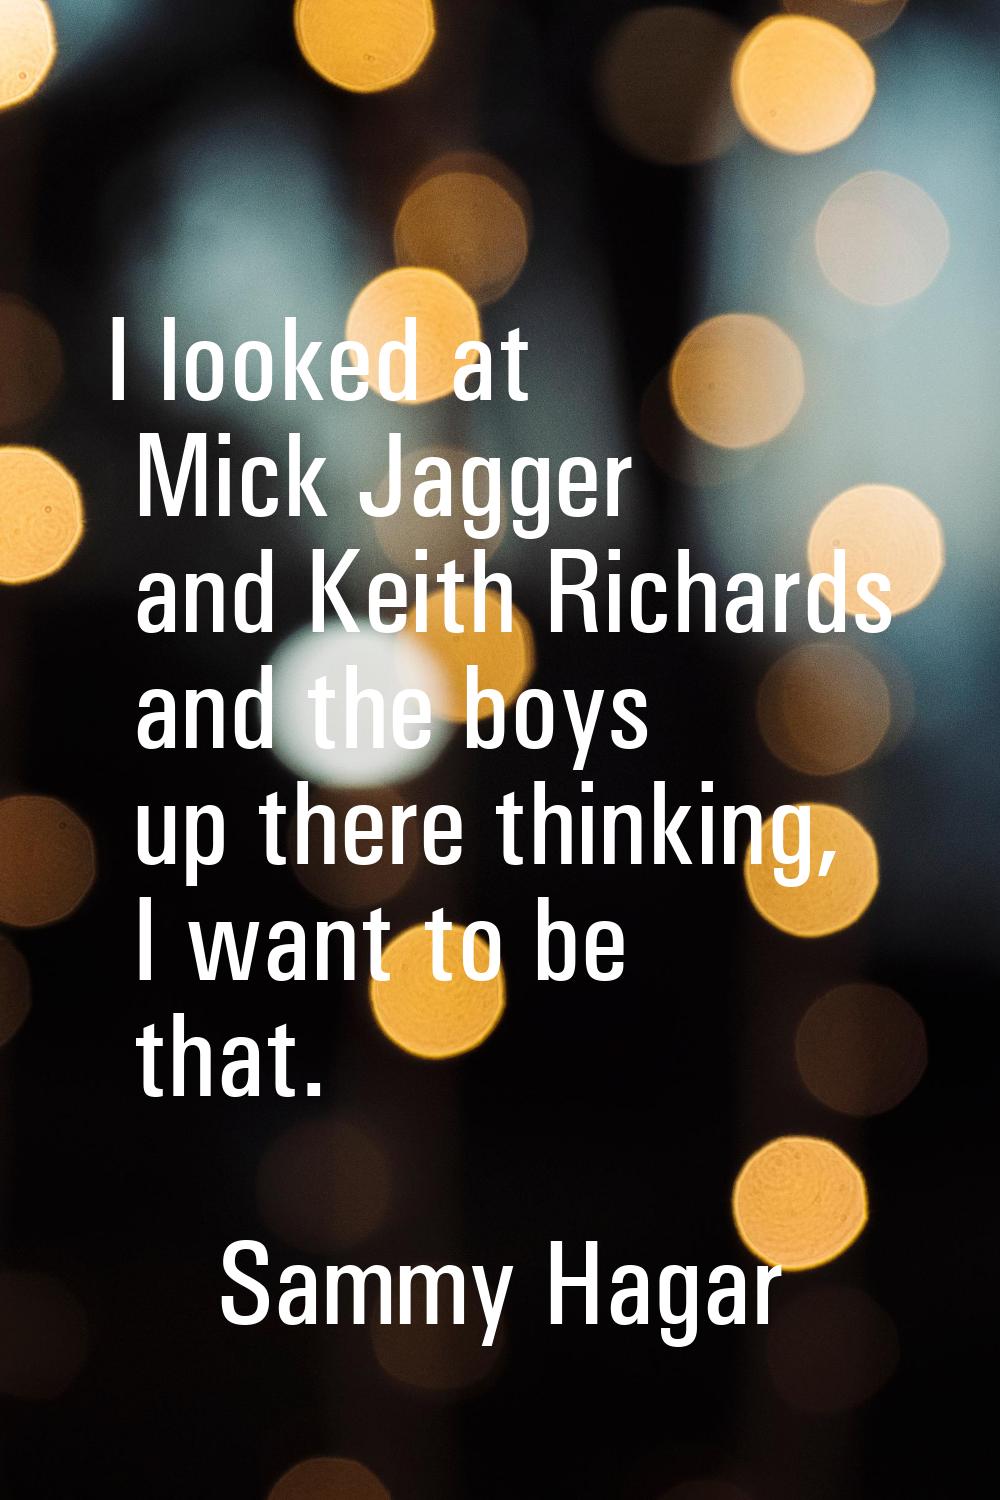 I looked at Mick Jagger and Keith Richards and the boys up there thinking, I want to be that.